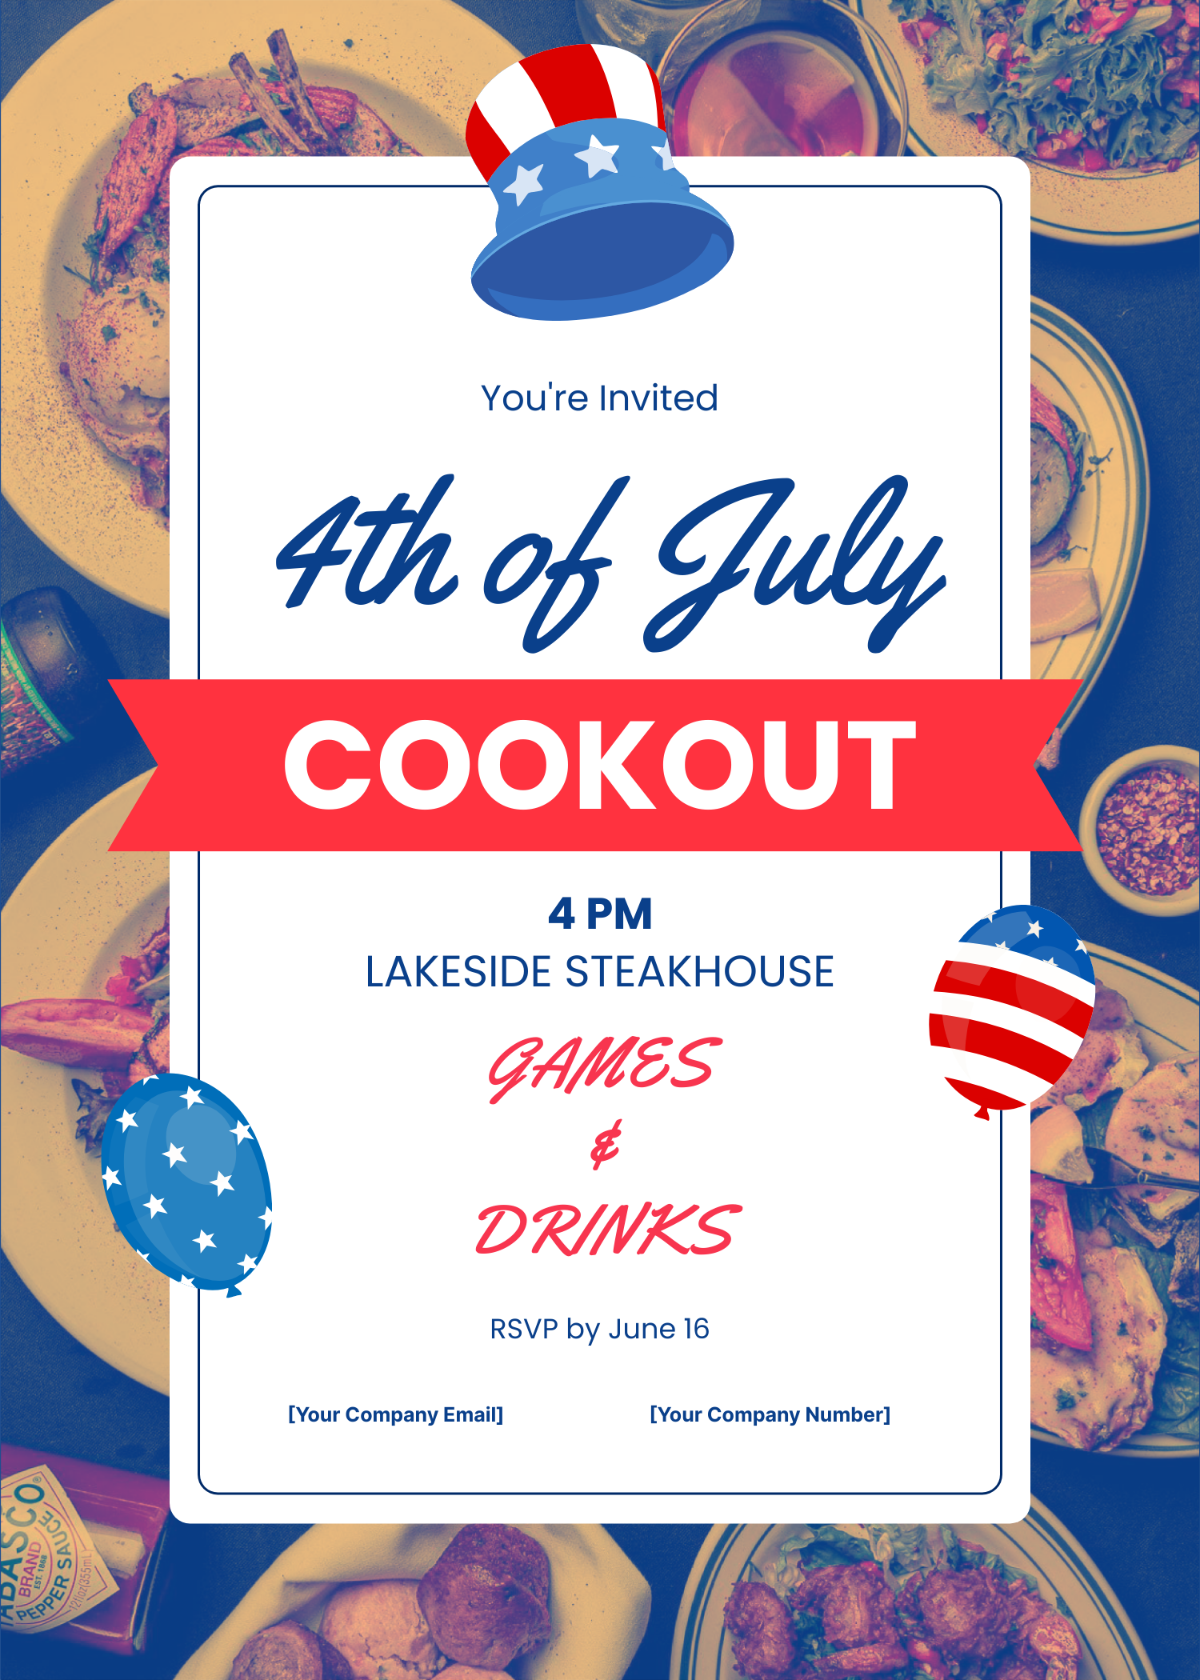 4th of July Cookout Invitation